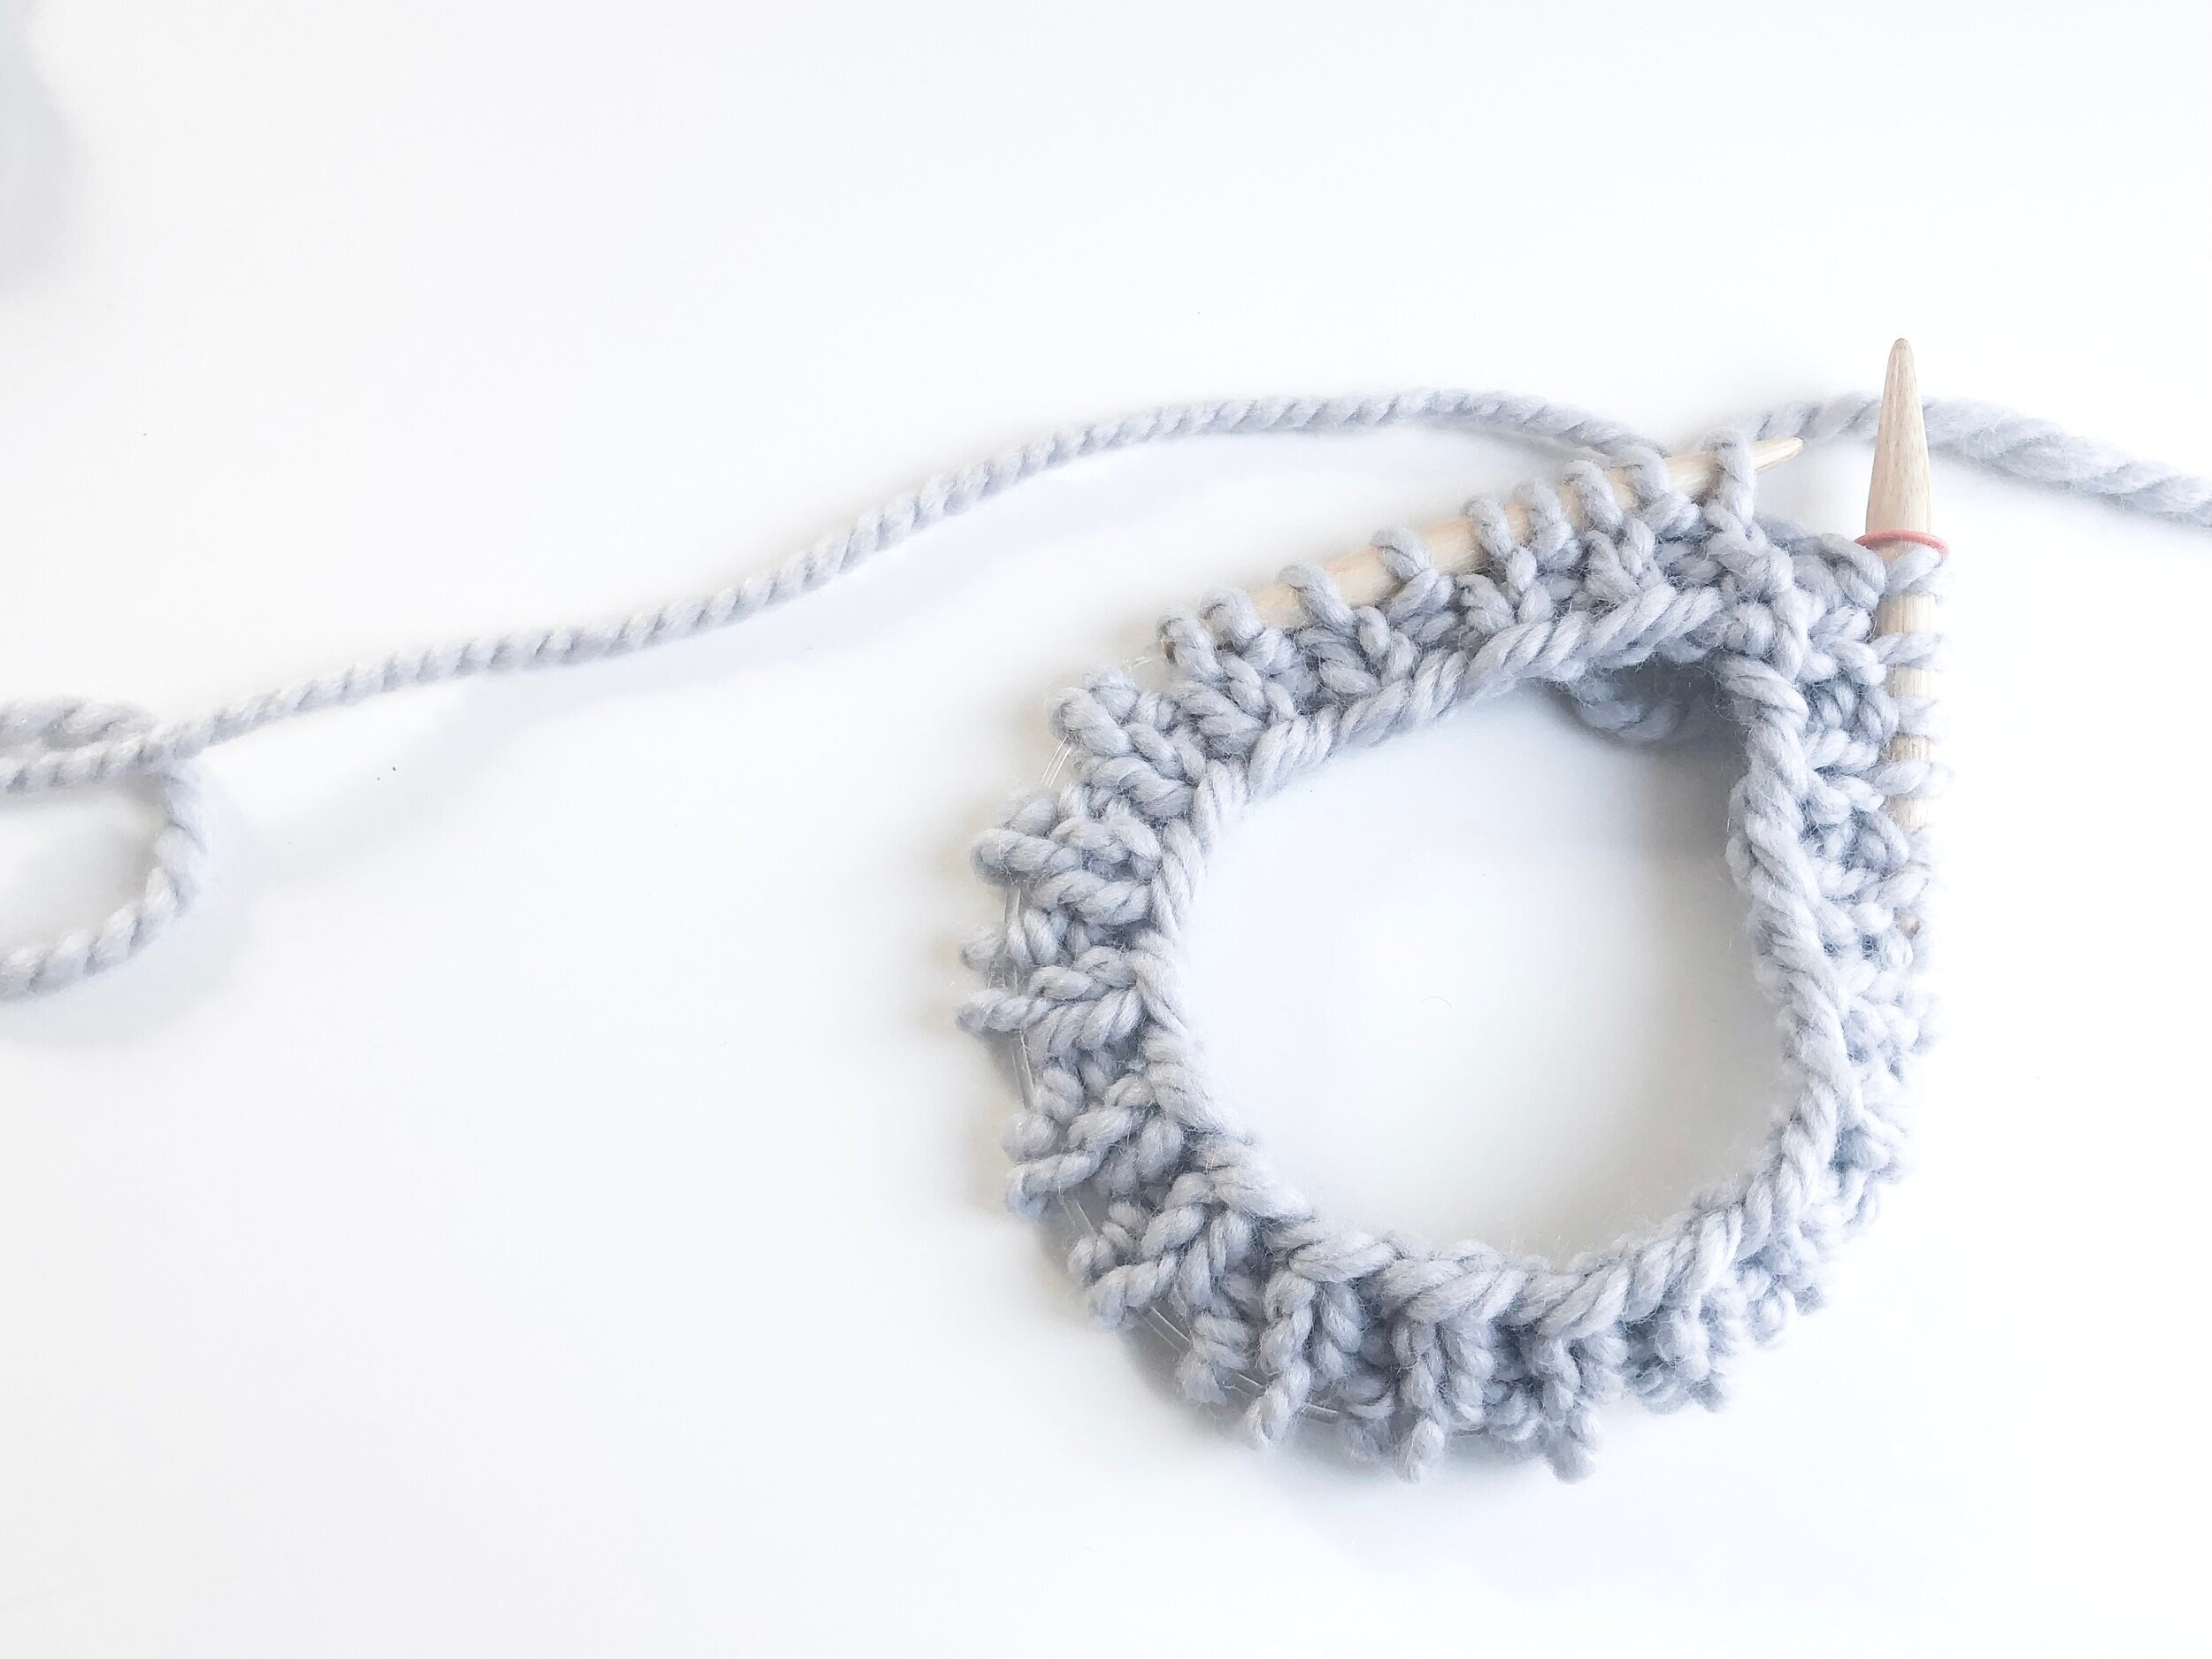 KNIT  How to K1P1 Rib Stitch in the Round — Ashley Lillis